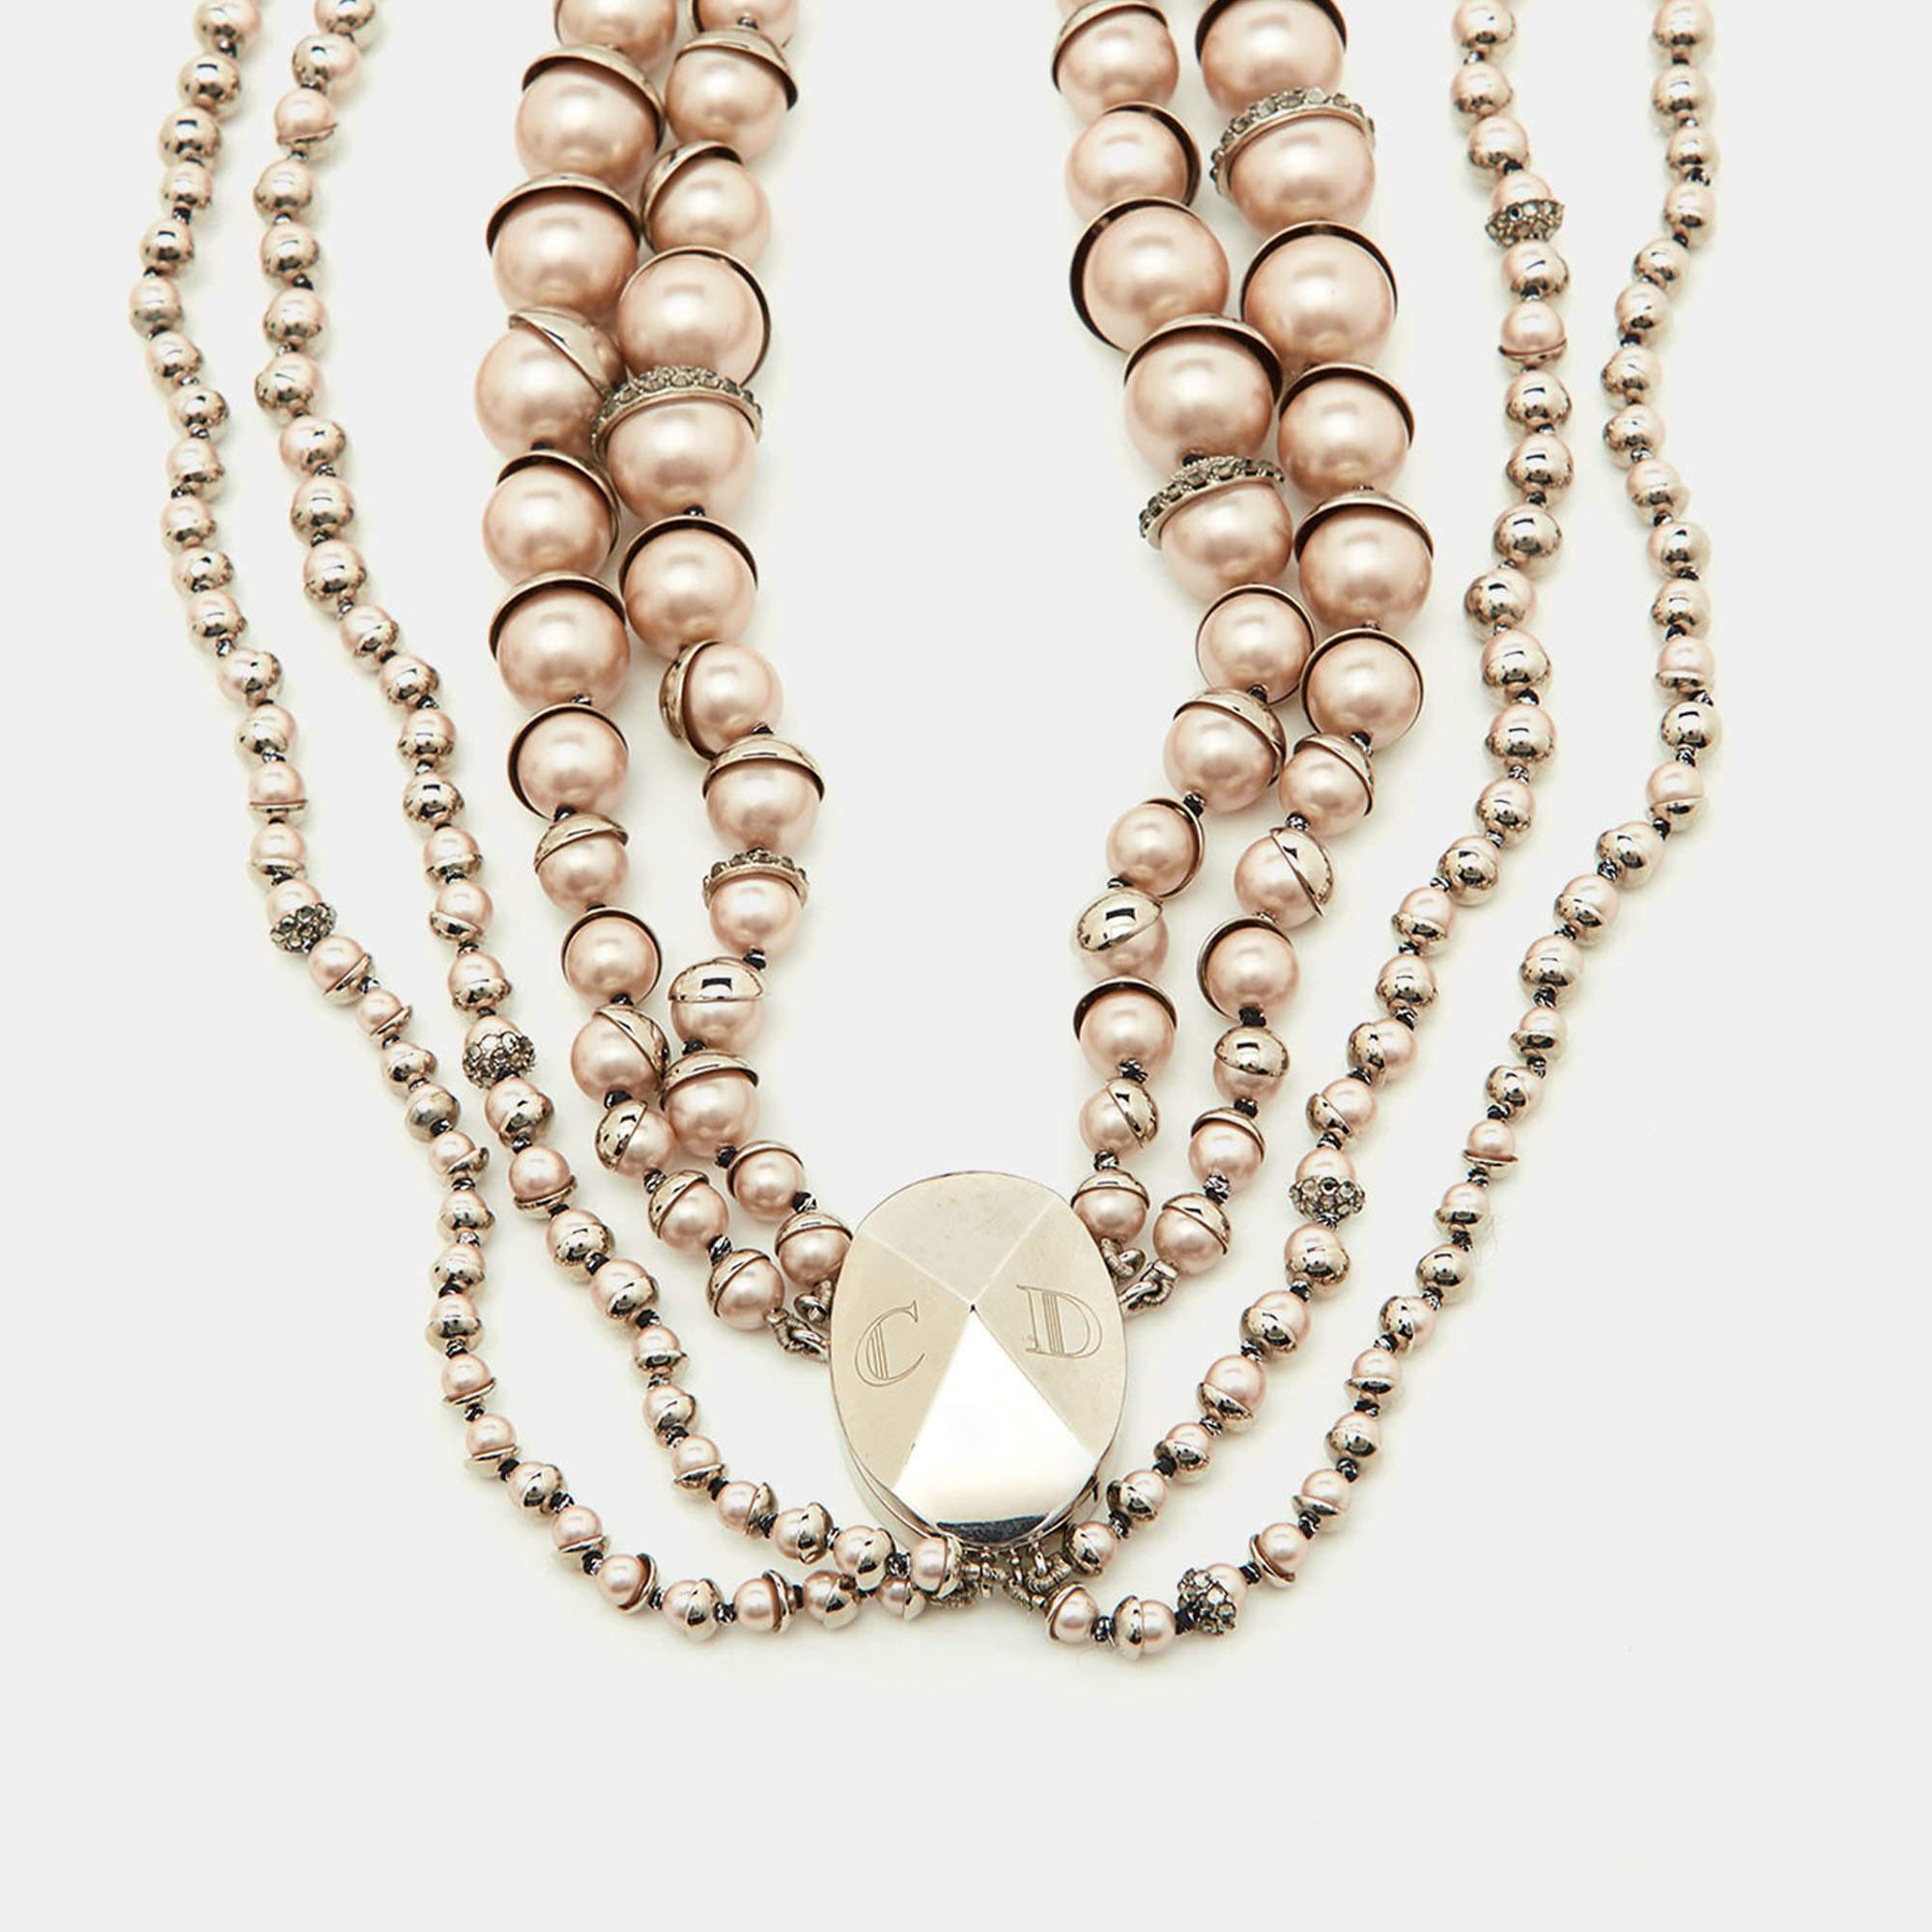 The Dior Mise En Dior necklace is an exquisite piece of jewelry. It features a multi-strand design with pink faux pearls and sparkling crystals, set in a silver-tone metal. This luxurious necklace exudes elegance, sophistication, and timeless